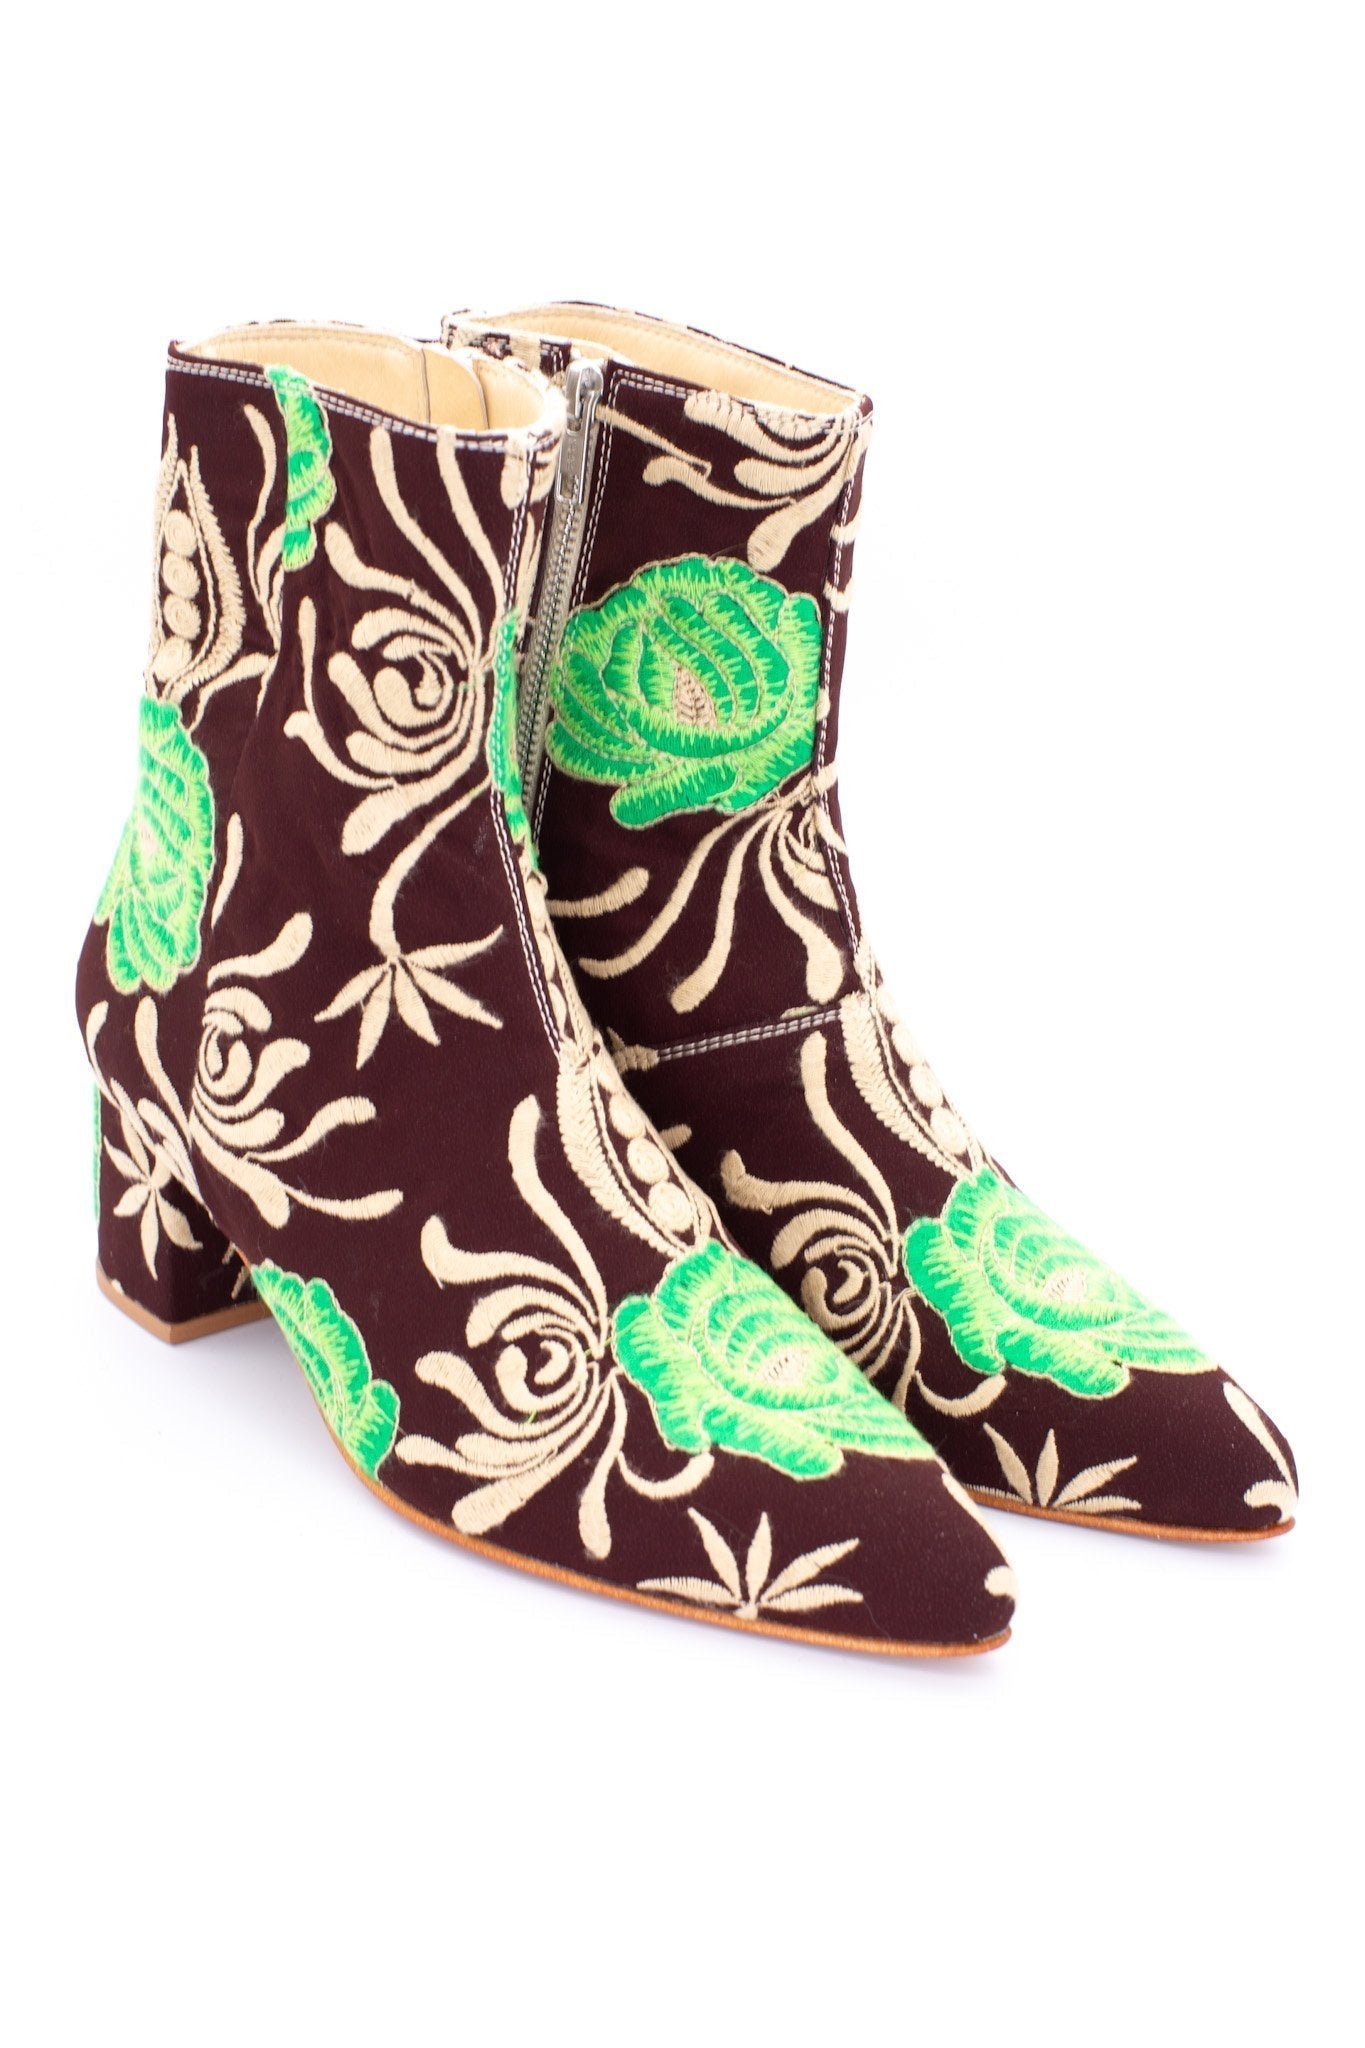 EMBROIDERED ANKLE BOOTS HEANA - BANGKOK TAILOR CLOTHING STORE - HANDMADE CLOTHING